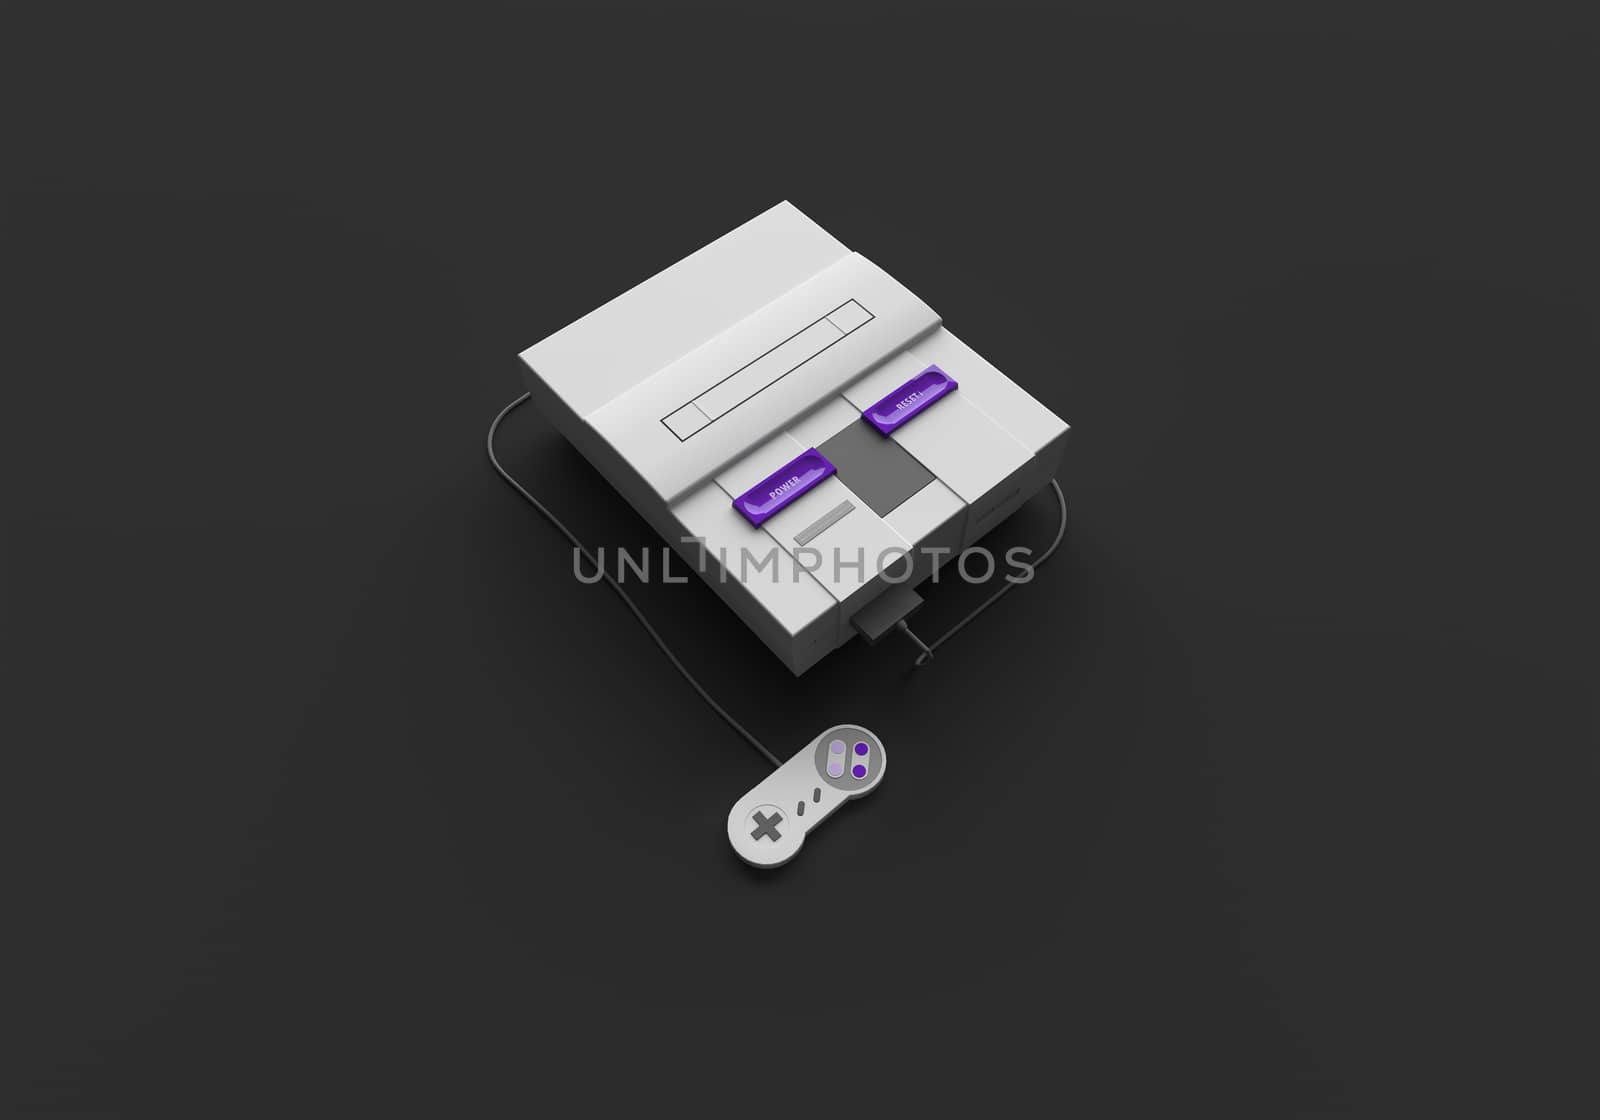 3D RENDERING OF HOME VIDEO GAME CONSOLE ON PLAIN BACKGROUND